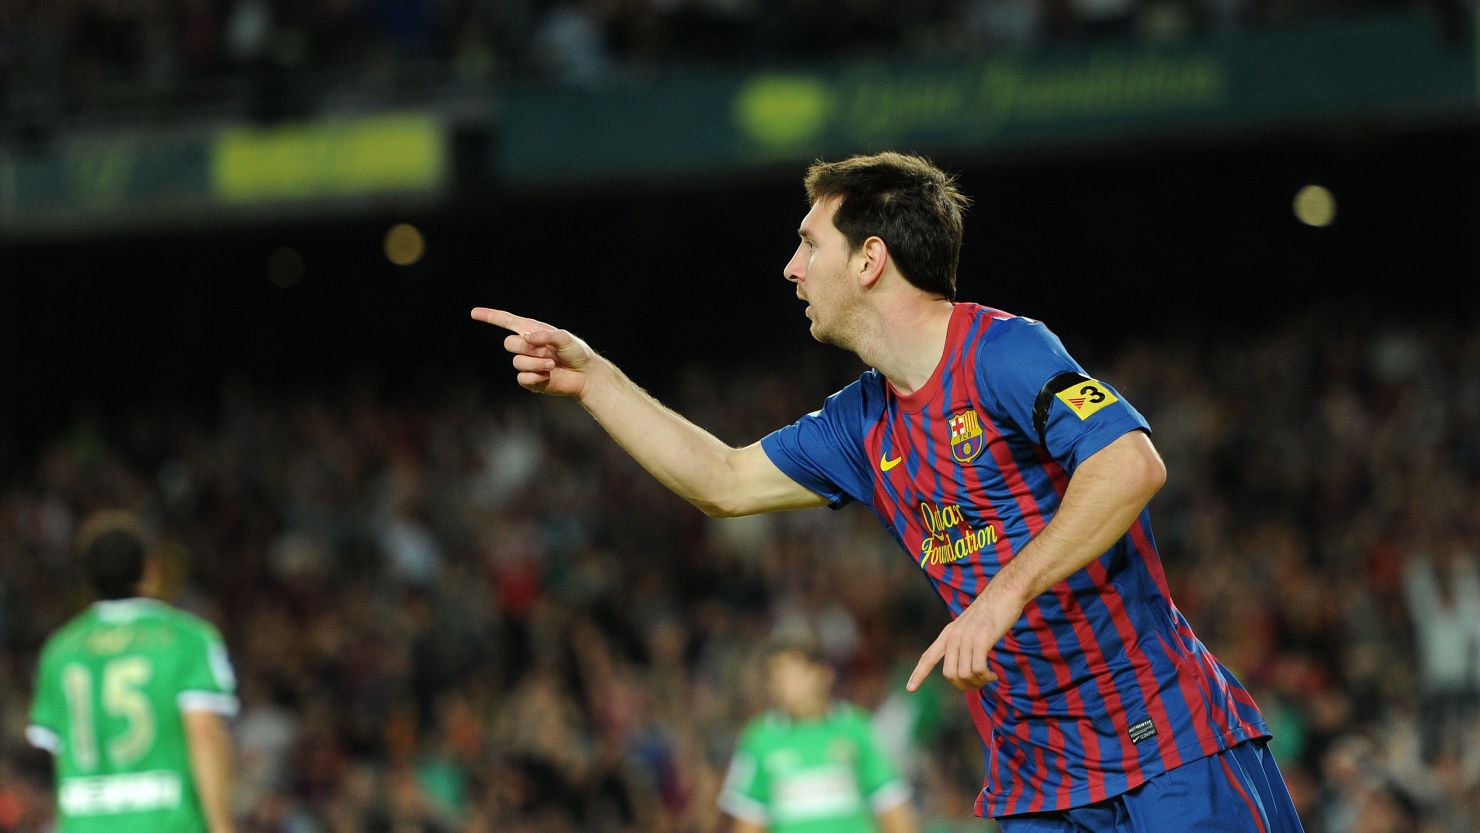 Lionel Messi celebrates yet another goal in the 3-0 win over Racing Santander.